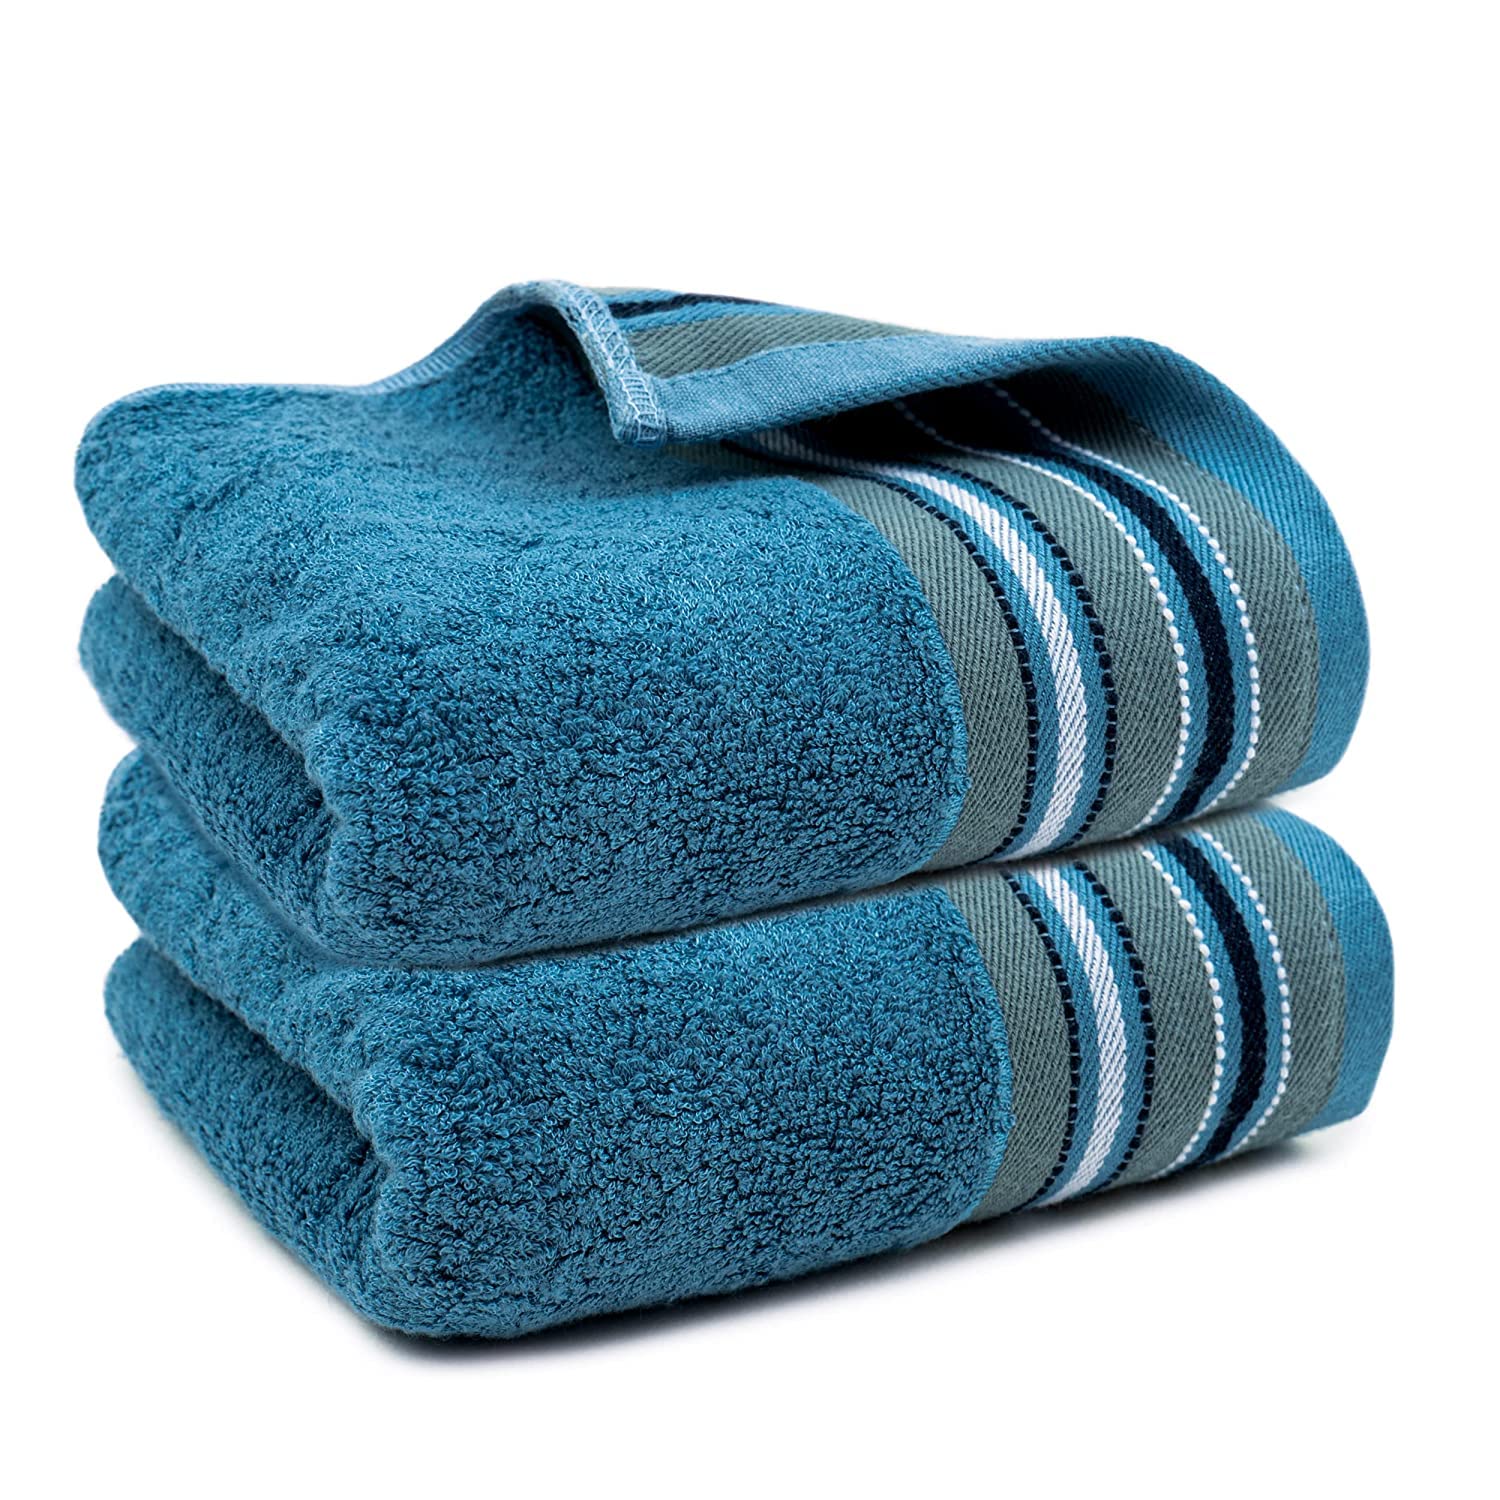 Mush Designer Bamboo Hand Towels -Ultra Soft, Absorbent & Quick Dry Towels for Bath, Spa and Yoga (Emerald Blue, Hand Towelset of 2) Hand Towels Emerald Blue